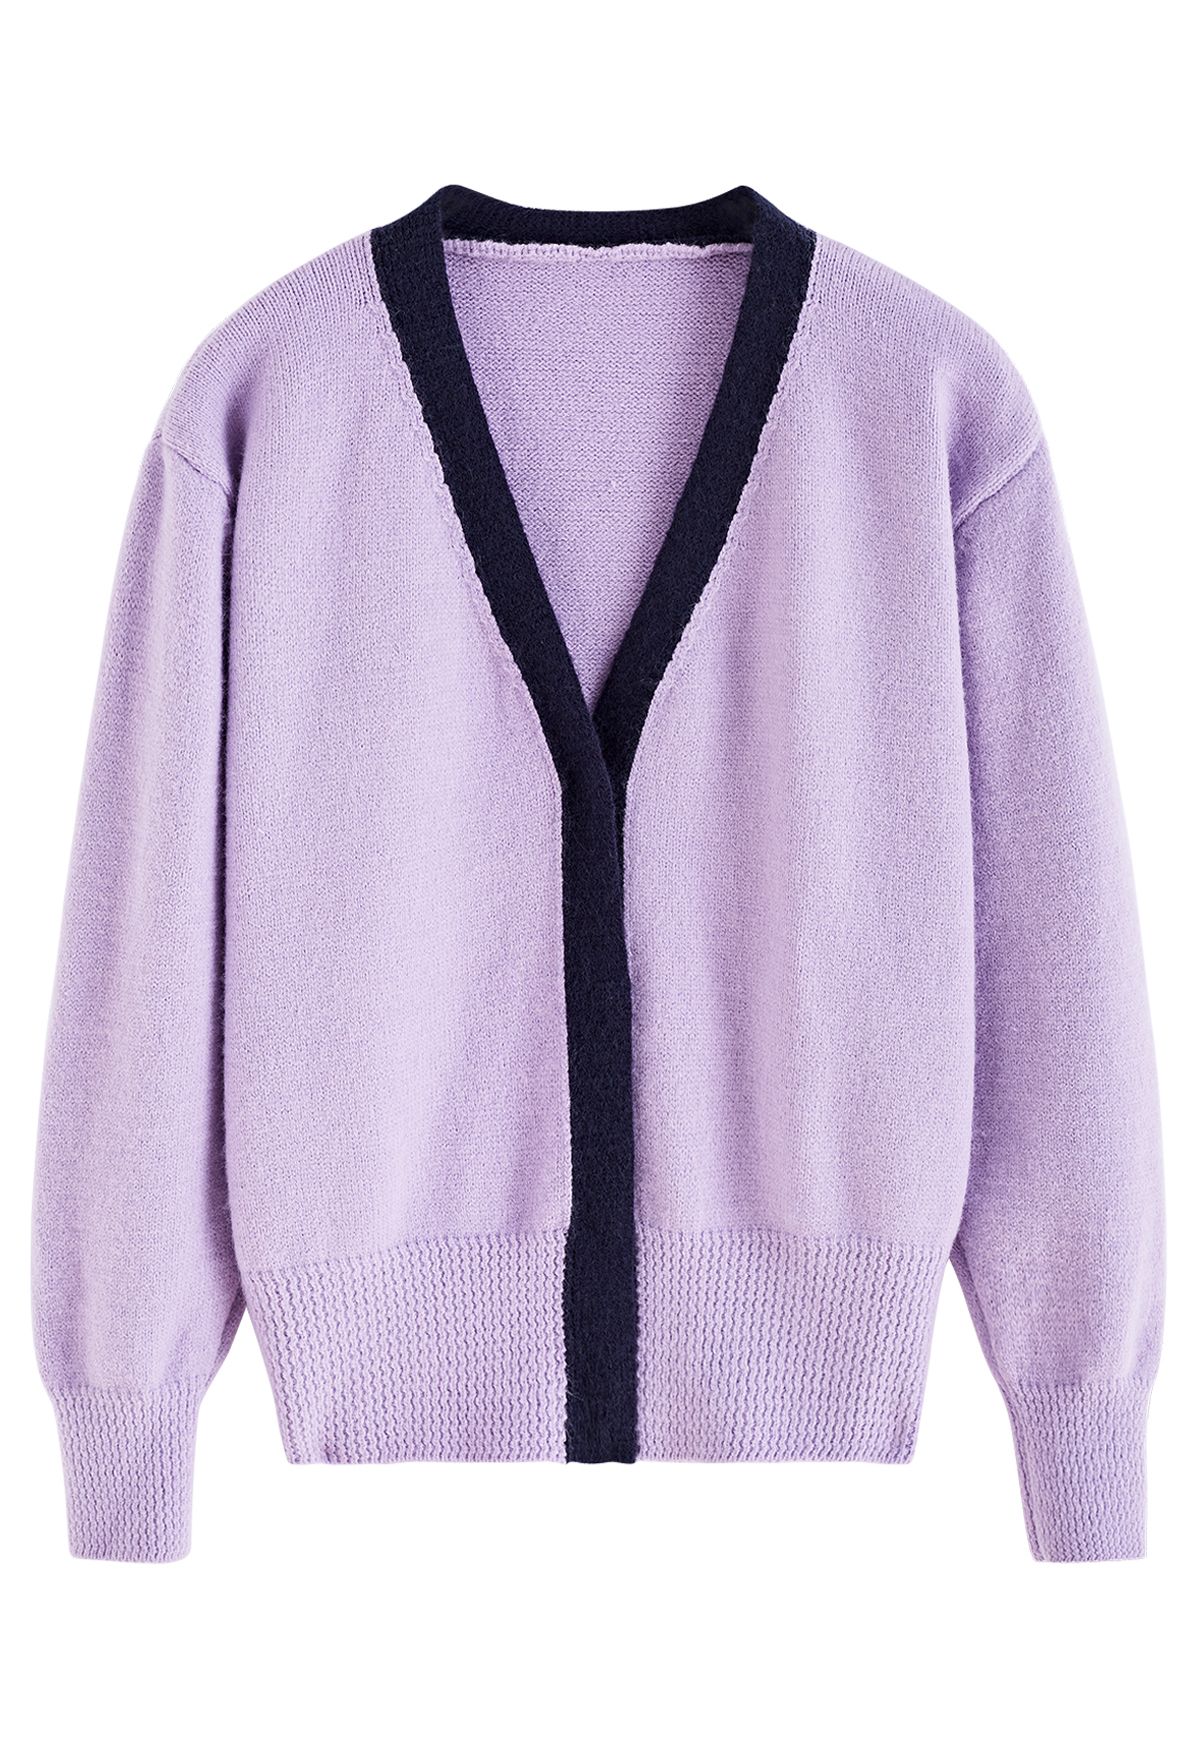 Contrast Edge V-Neck Knit Cardigan in Lilac